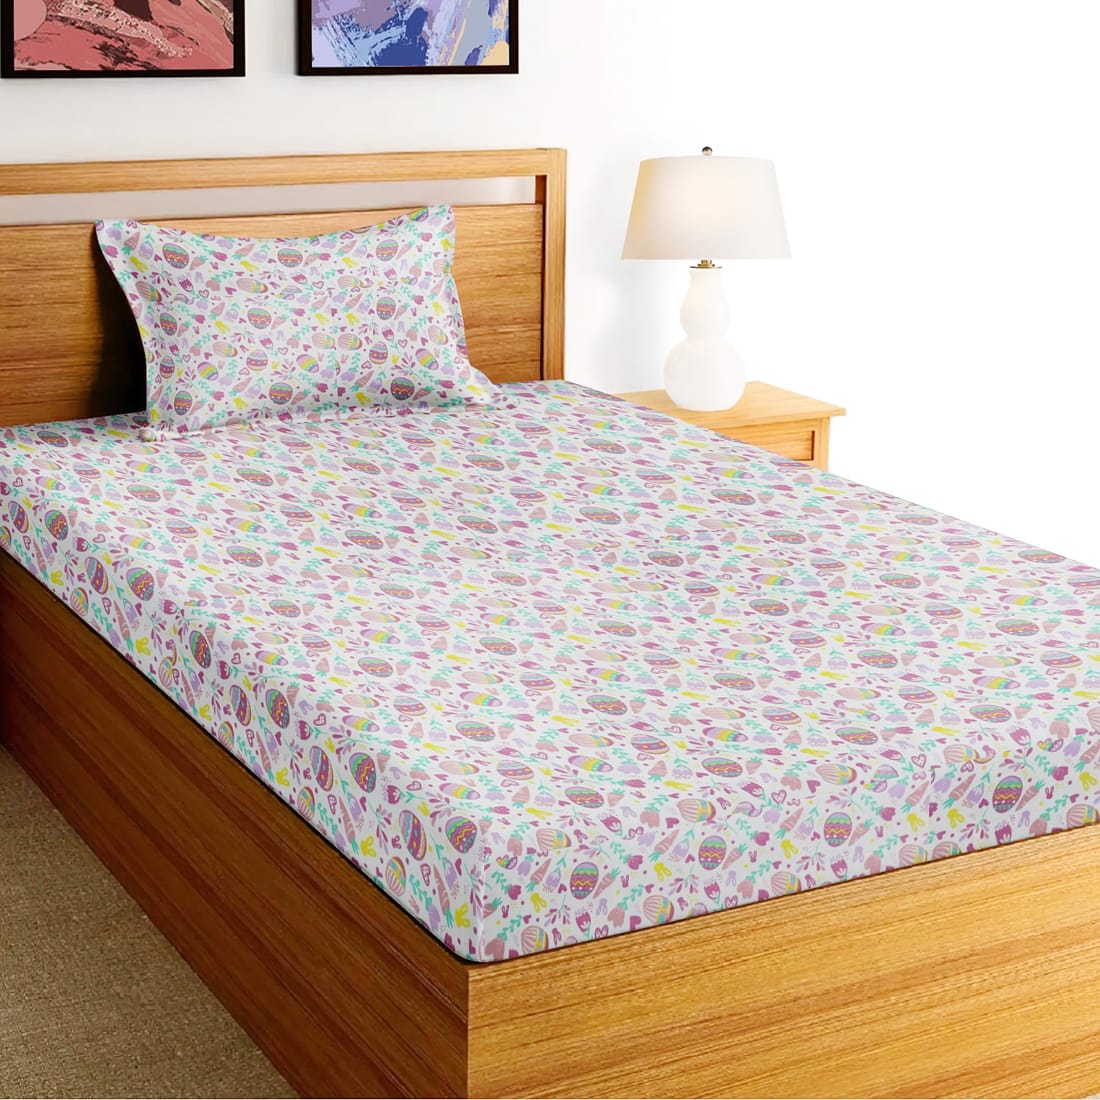 Soft Cotton Digital Print Single Fitted Bedsheet For Kids In Magenta